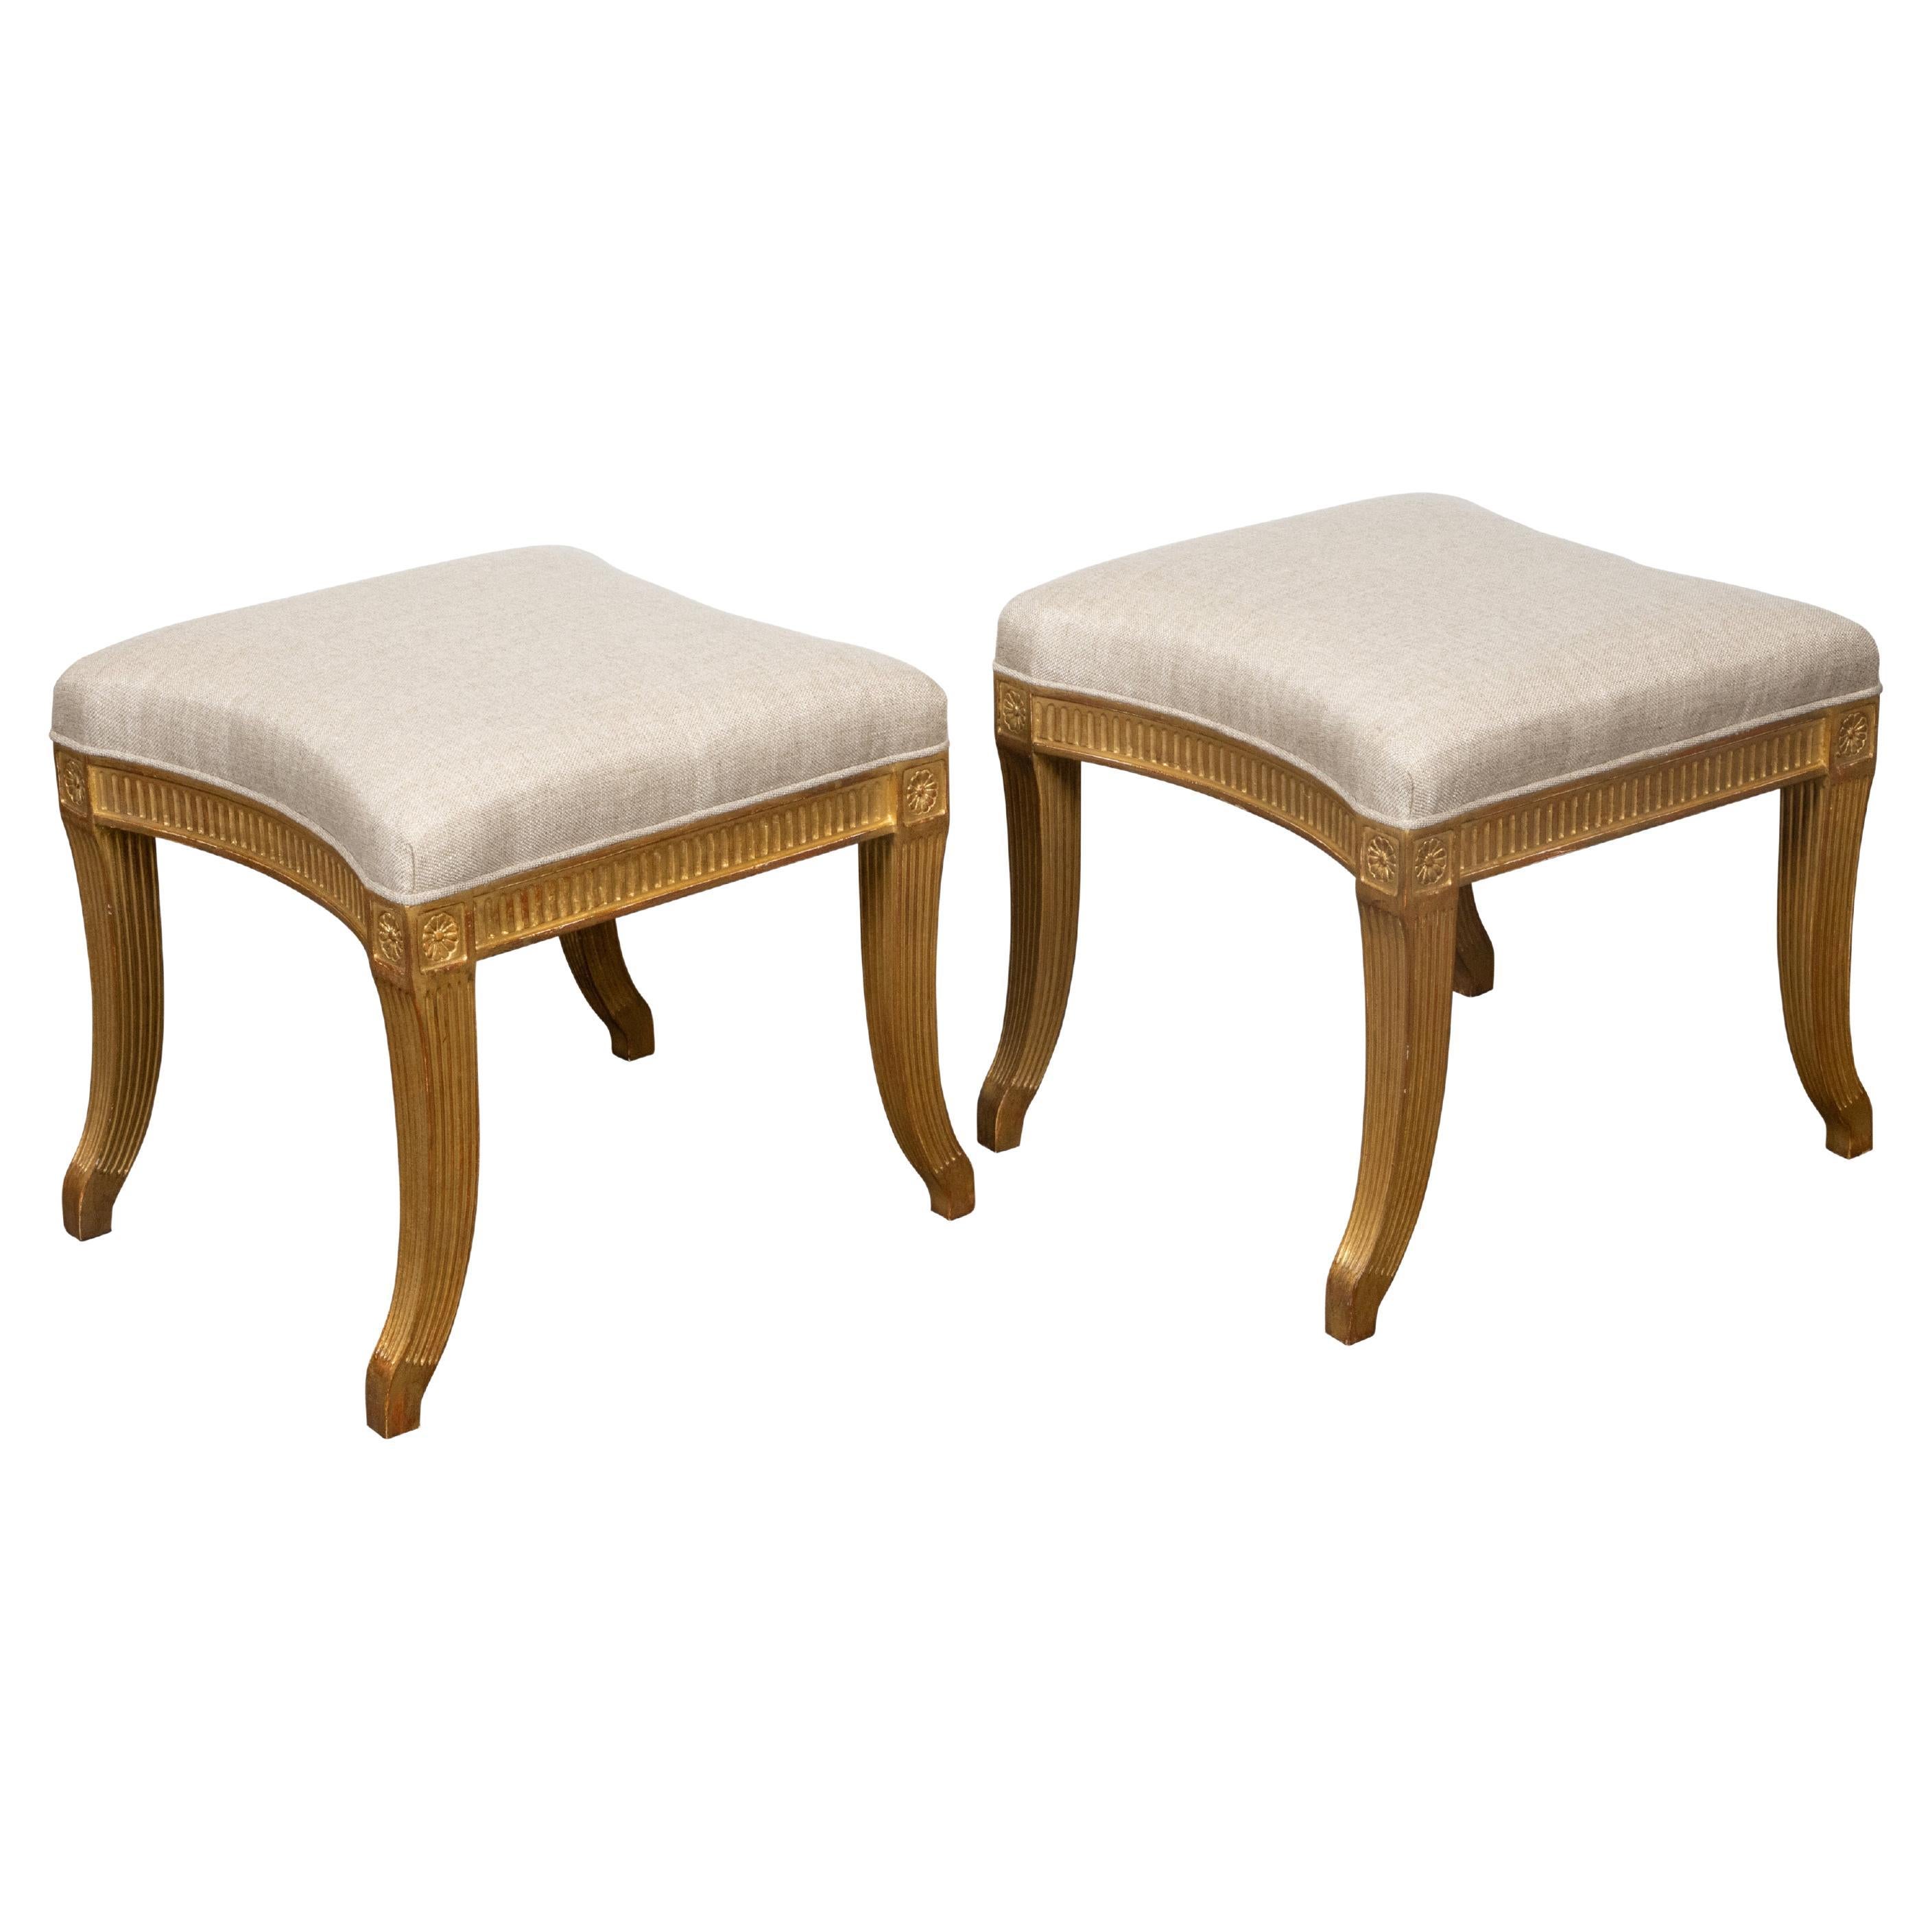 Pair of French Directoire Style Midcentury Giltwood Stools with New Upholstery